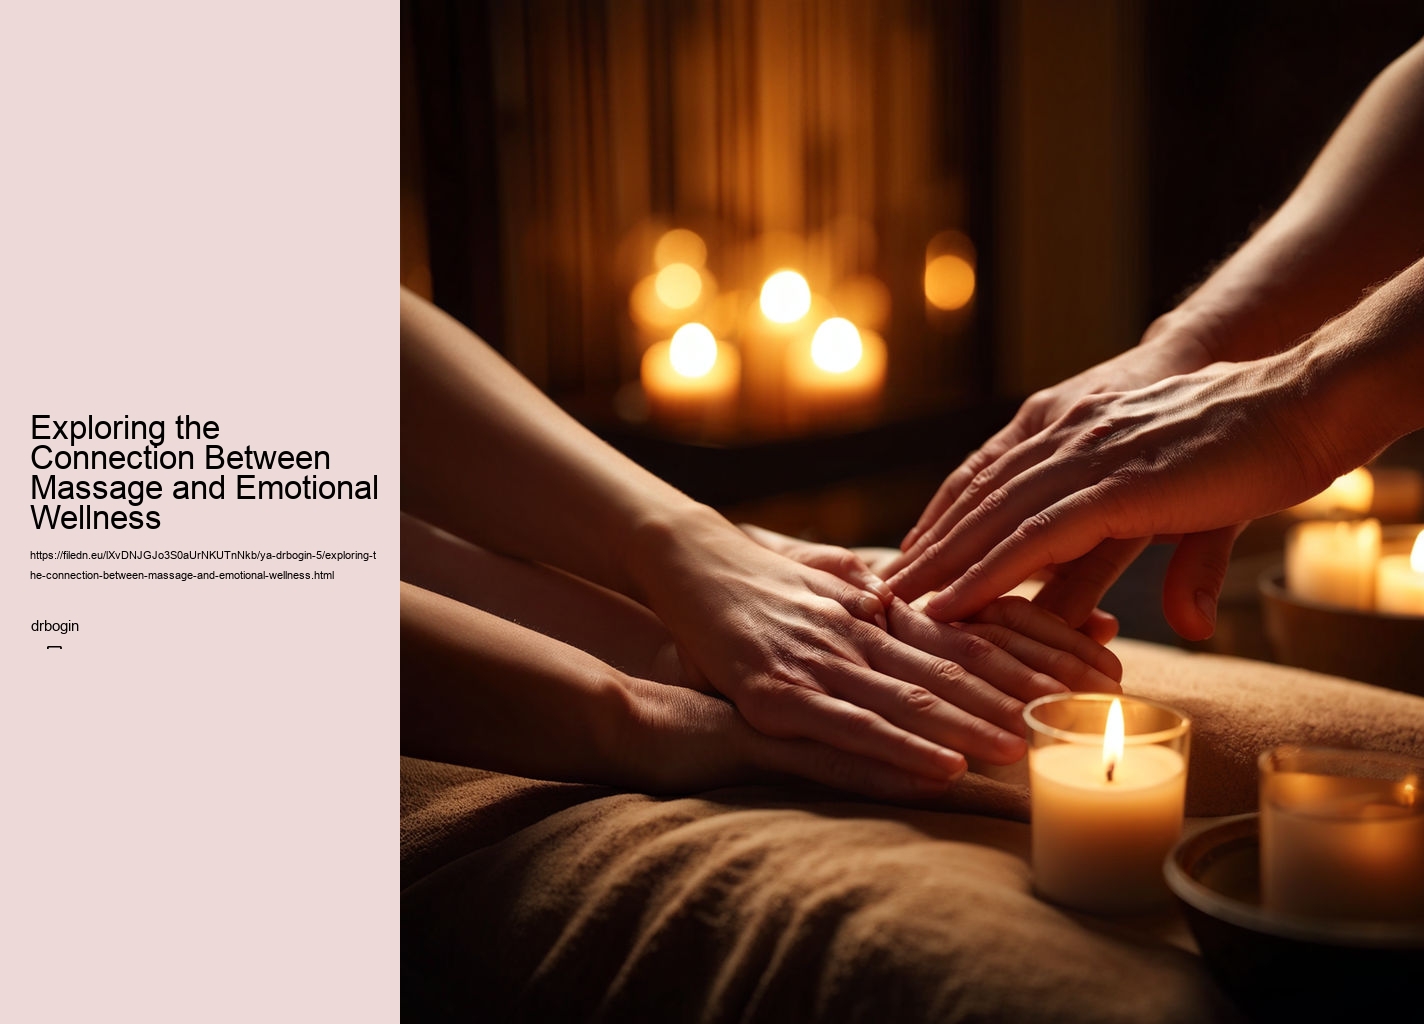 Exploring the Connection Between Massage and Emotional Wellness